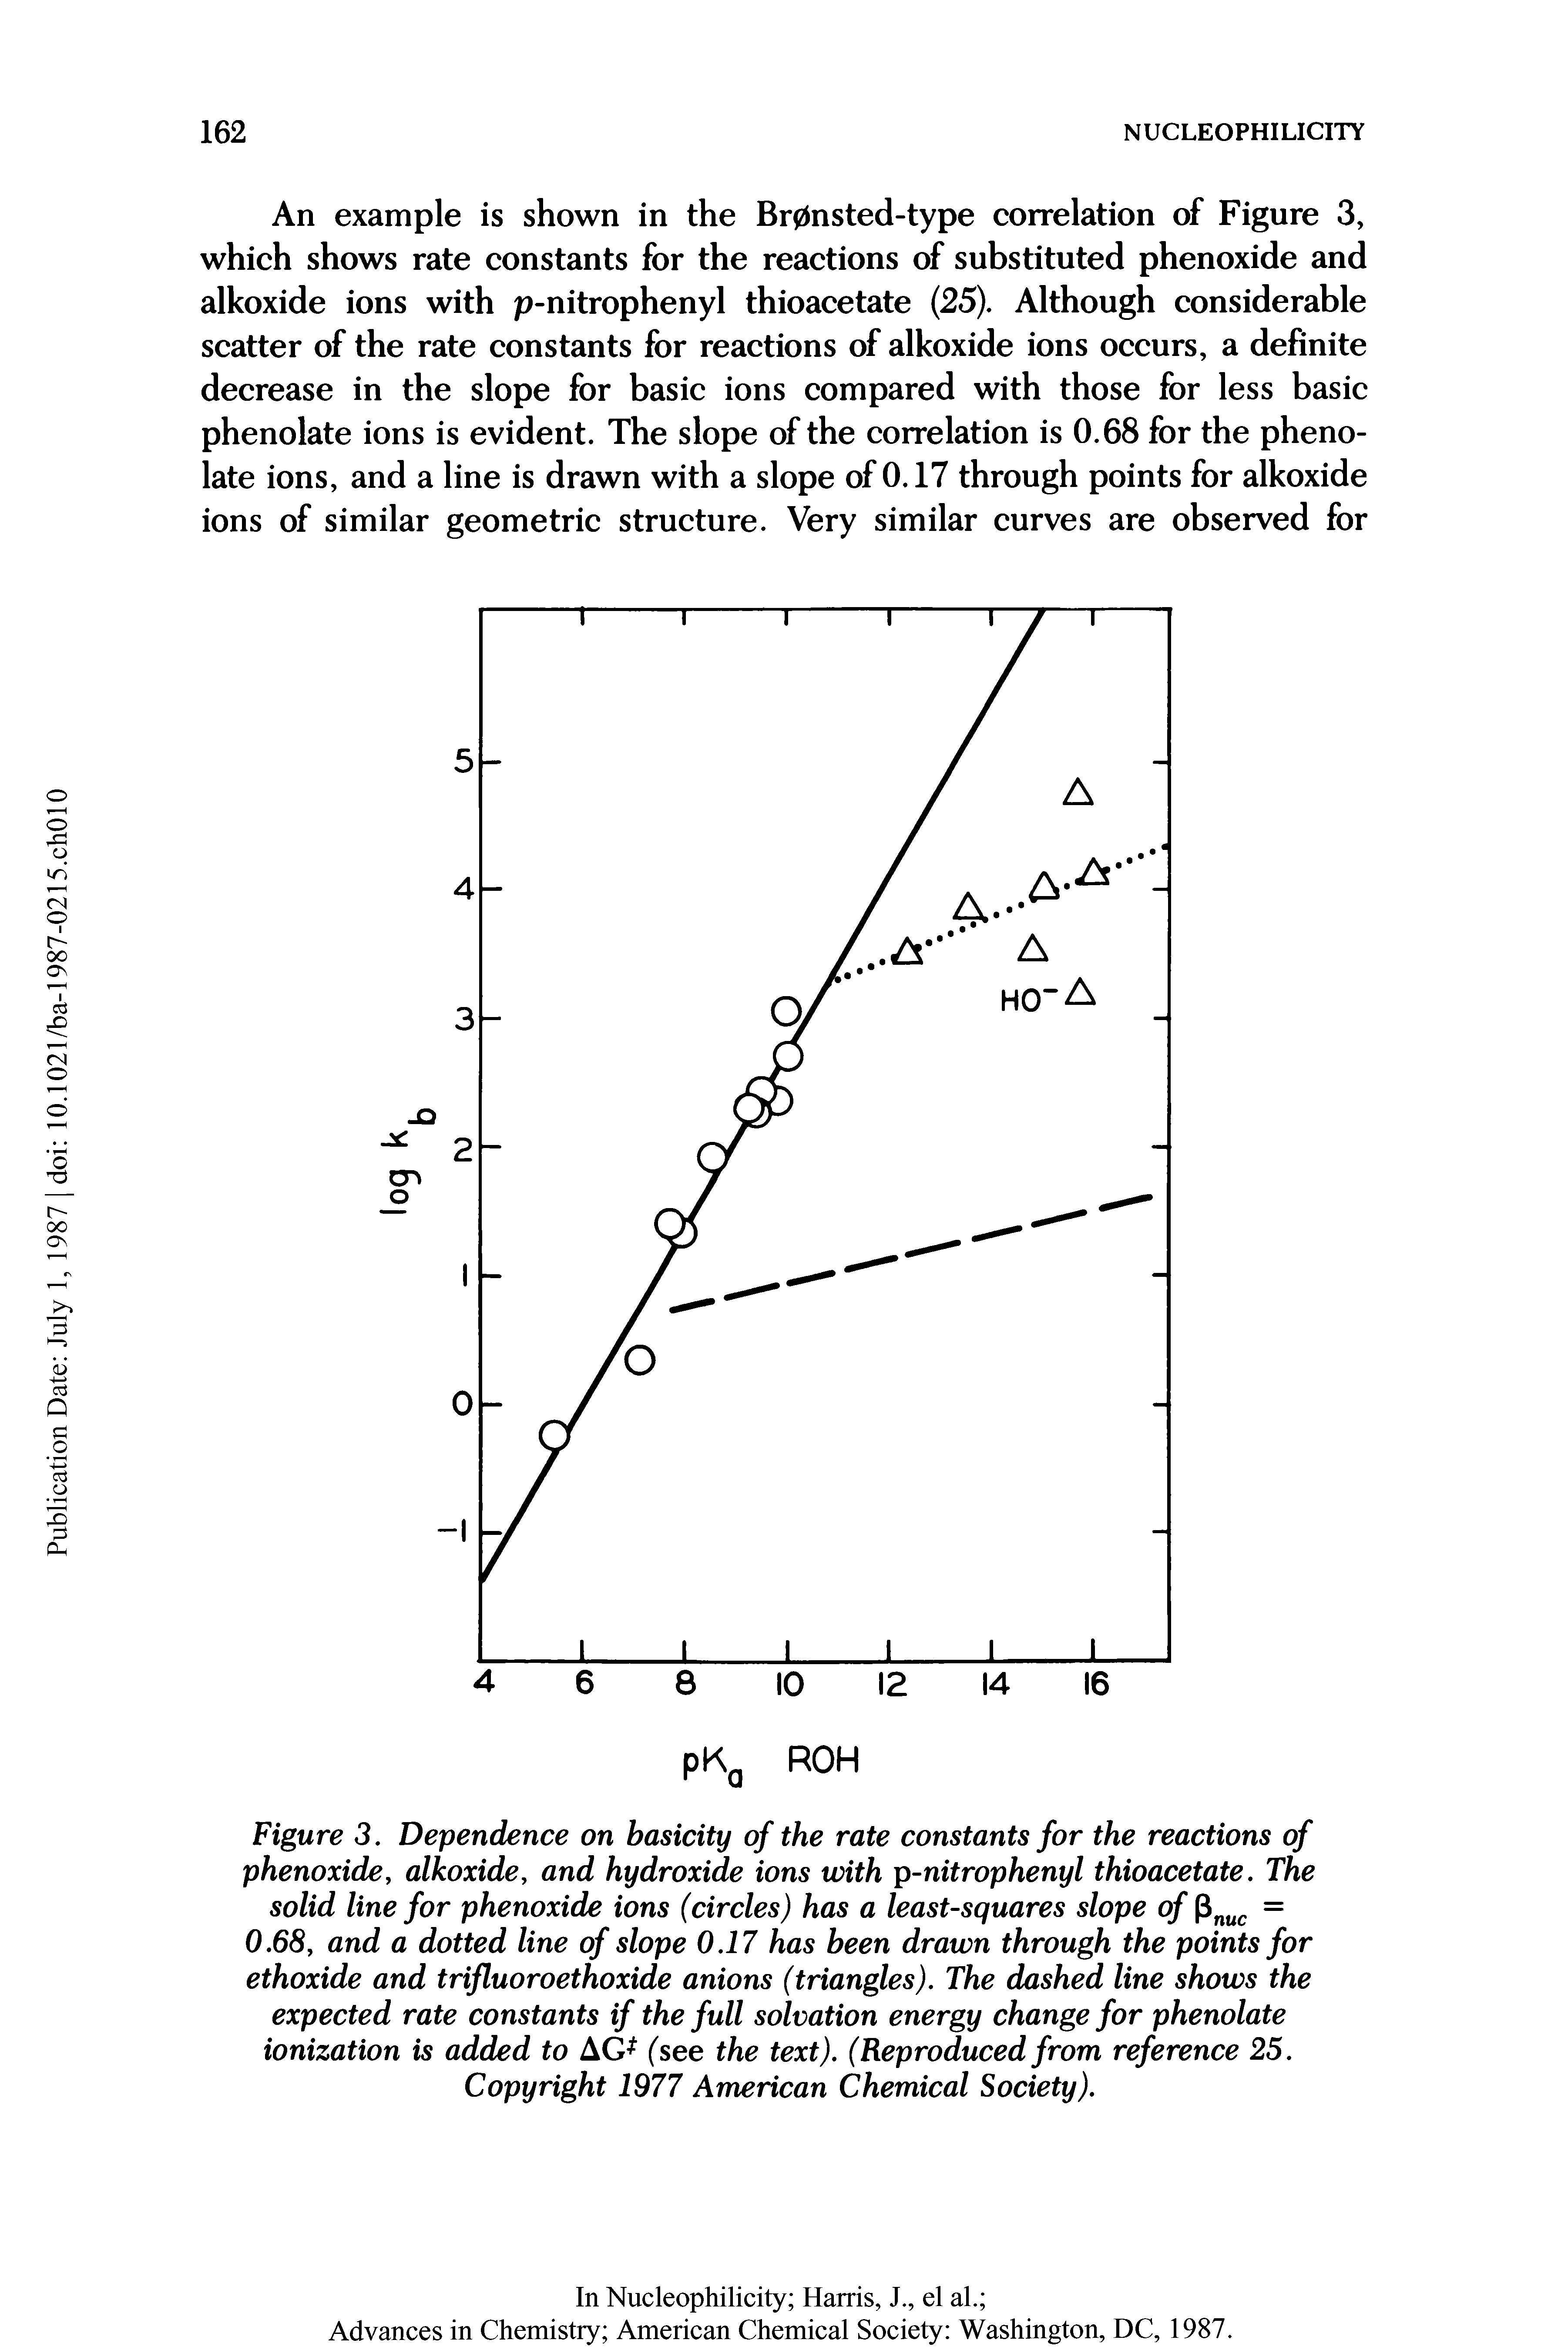 Figure 3. Dependence on basicity of the rate constants for the reactions of phenoxide, alkoxide, and hydroxide ions with p-nitrophenyl thioacetate. The solid line for phenoxide ions (circles) has a least-squares slope of Pnuc = 0.68, and a dotted line of slope 0.17 has been drawn through the points for ethoxide and trifluoroethoxide anions (triangles). The dashed line shows the expected rate constants if the full solvation energy change for phenolate ionization is added to AG (see the text). (Reproduced from reference 25.